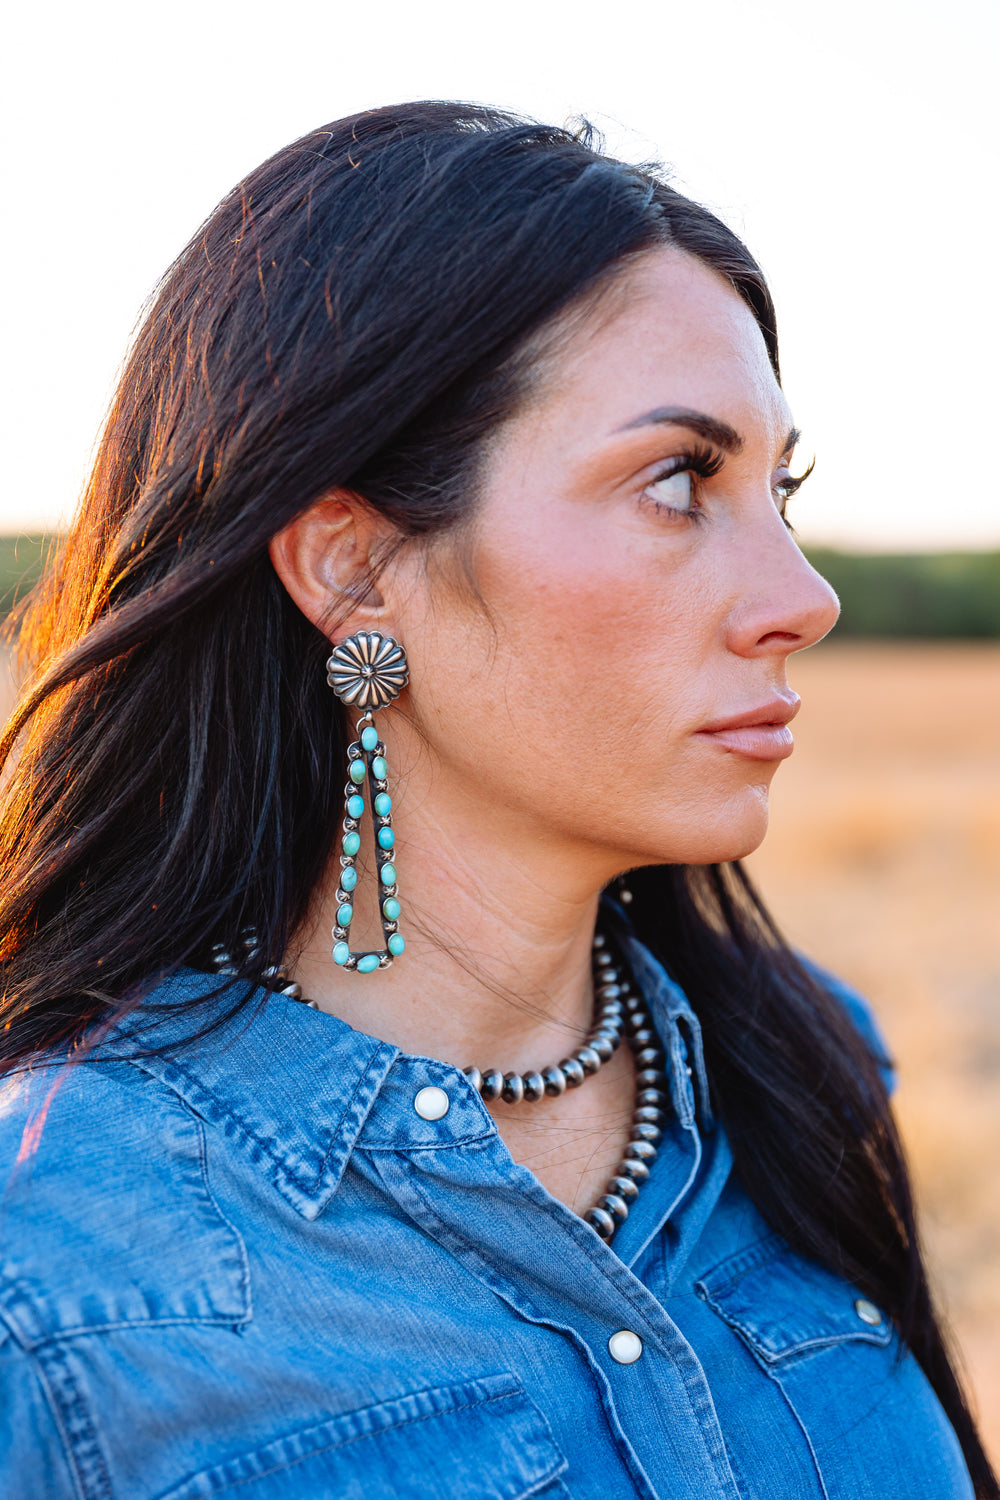 Large Turquoise and Silver Maren Earring